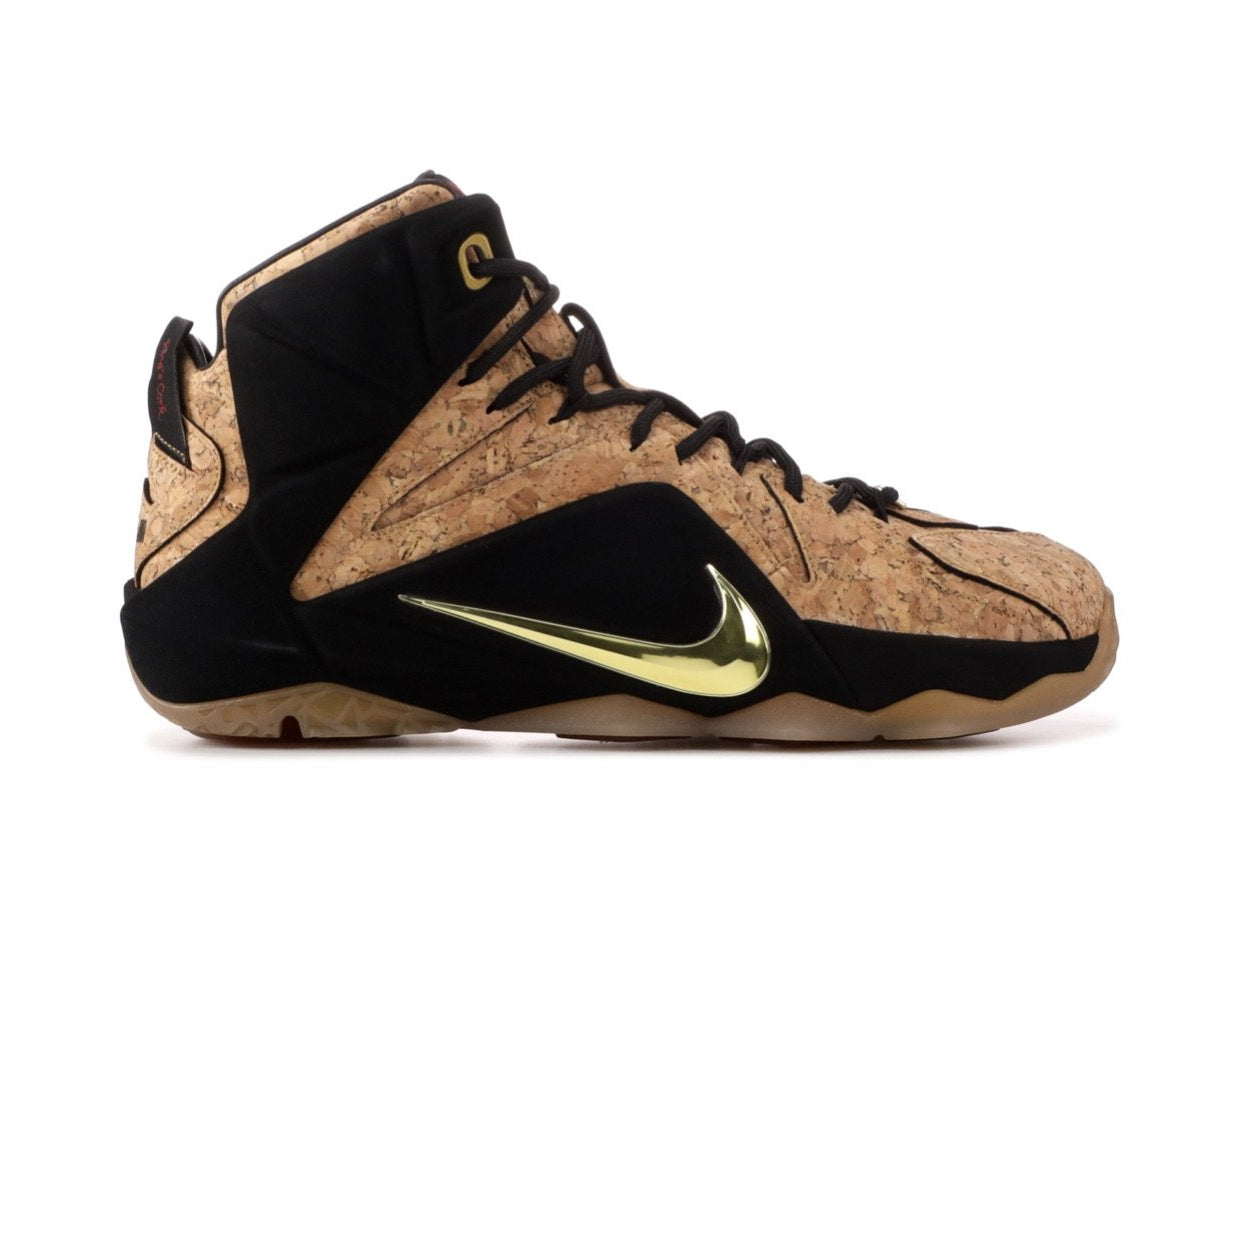 LeBron 12 “king’s cork” - Centrall Online